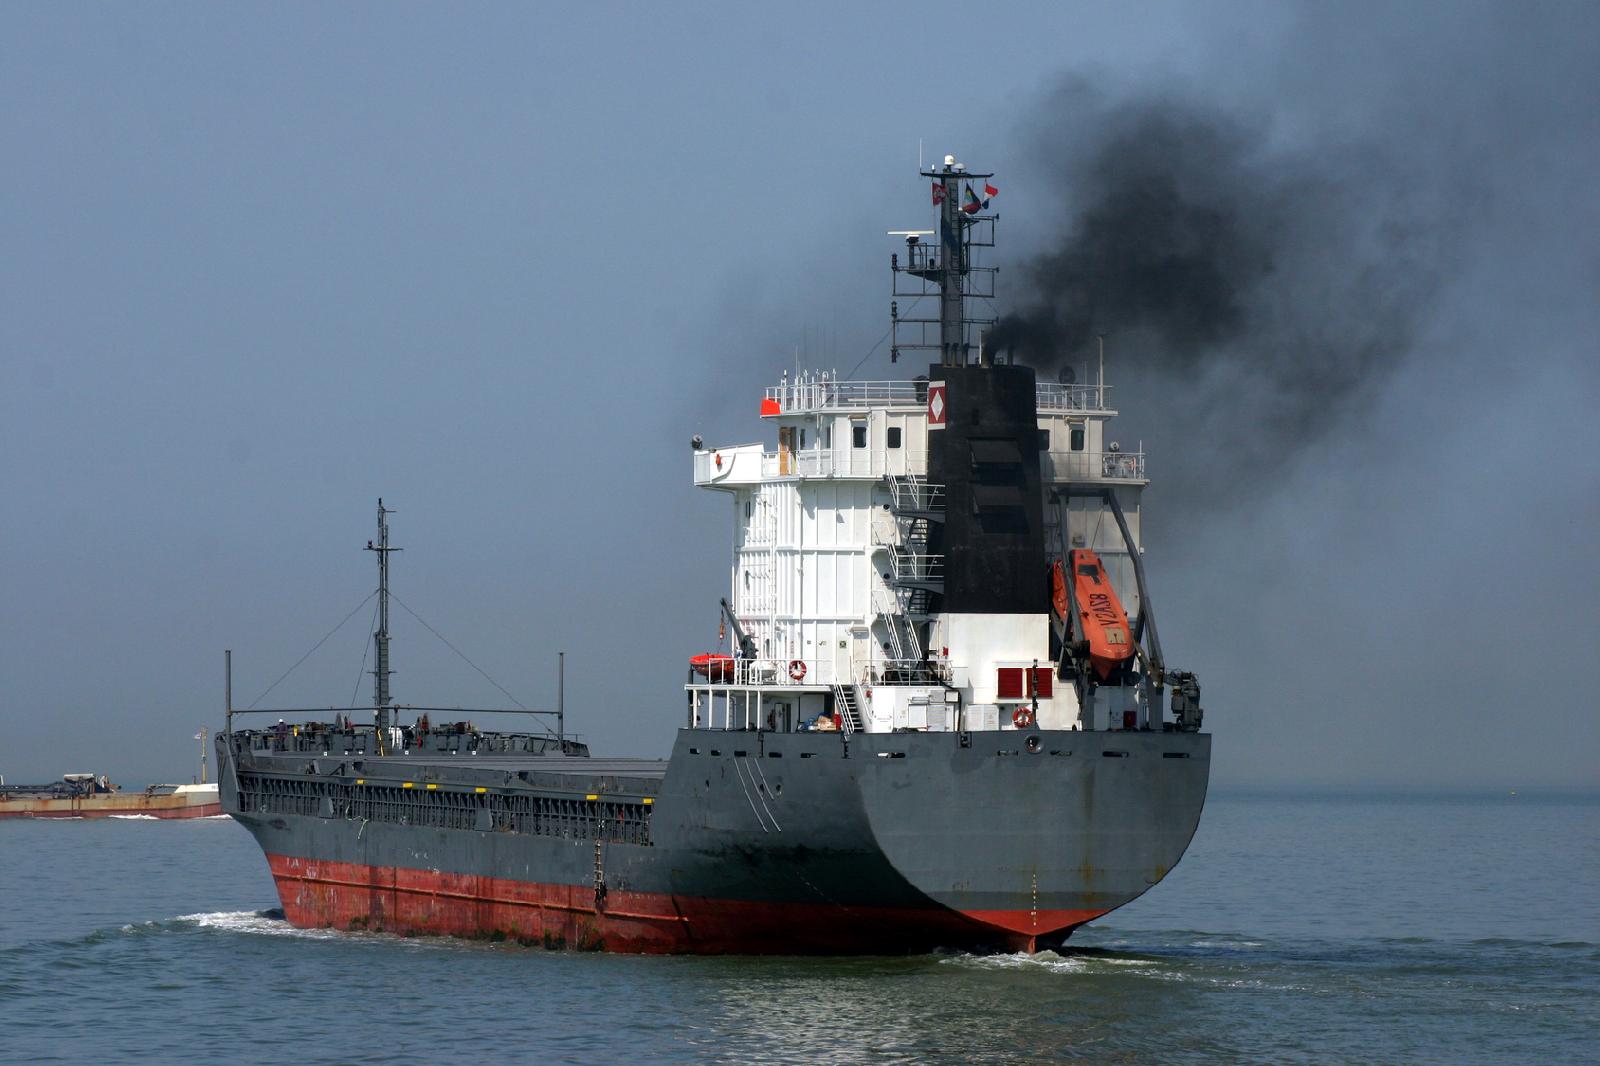 Greece says charterers should pay EU emissions trading costs